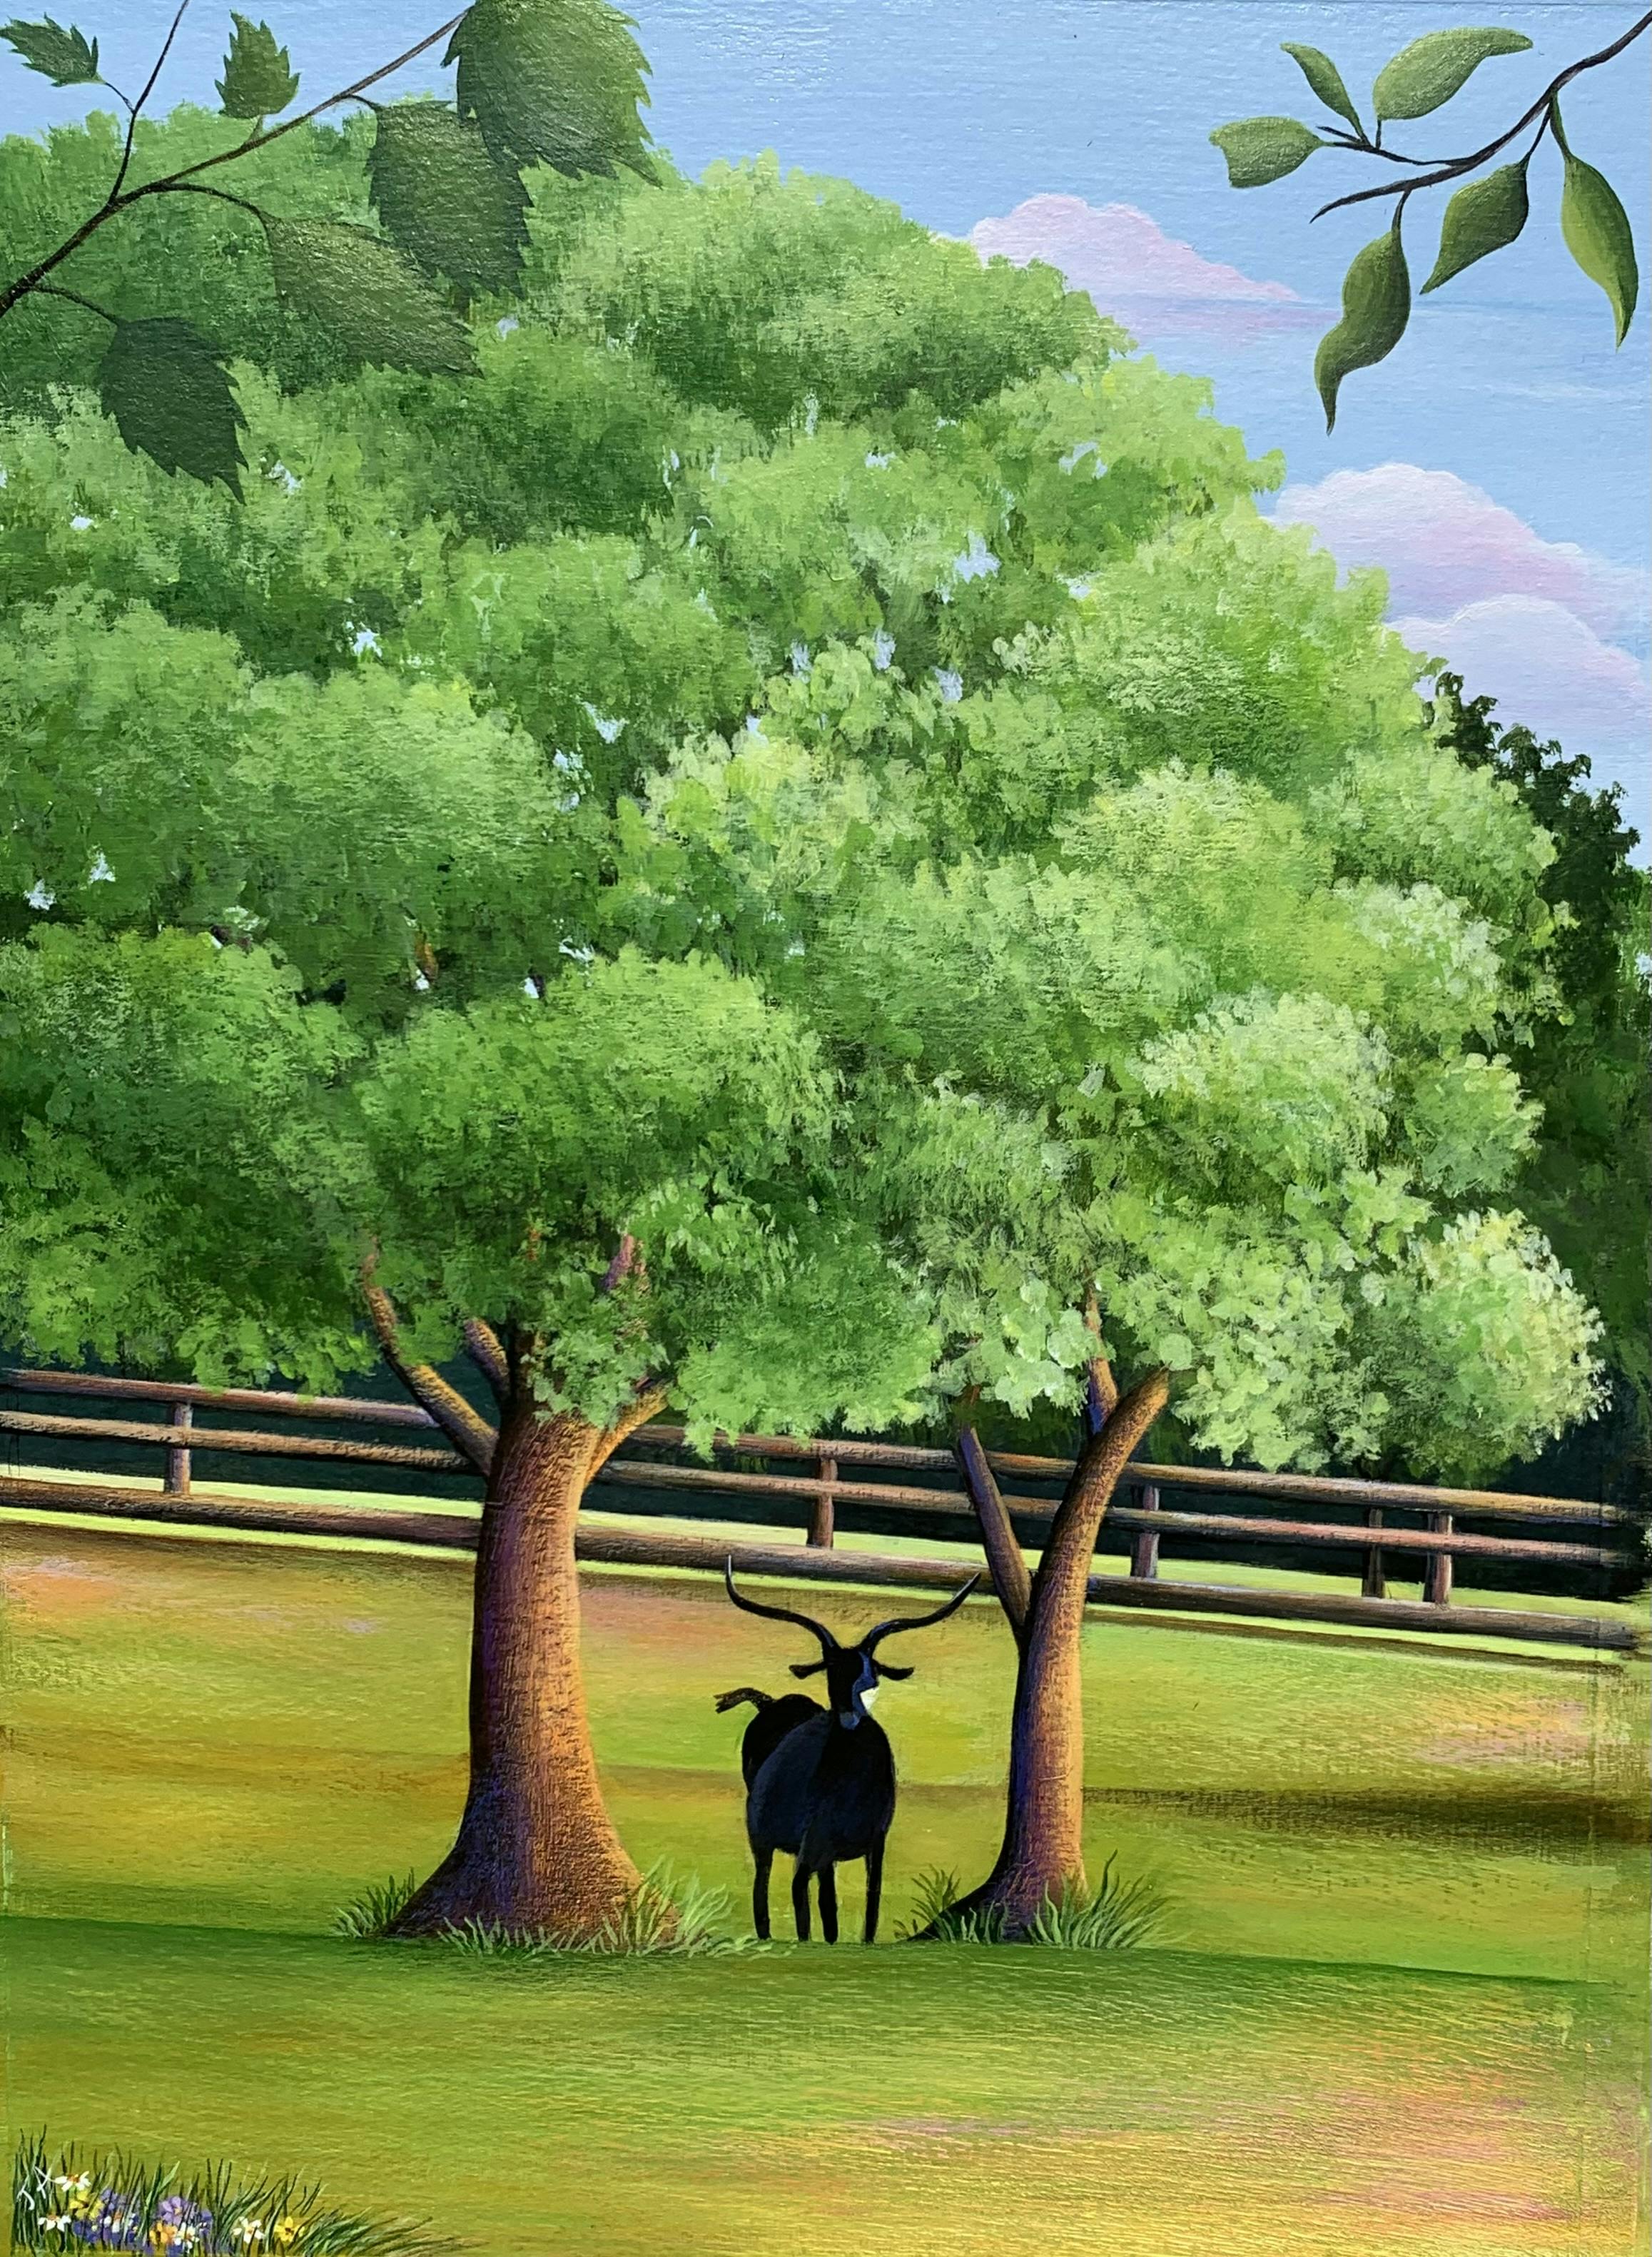 "Black Goat in a Morning Meadow"